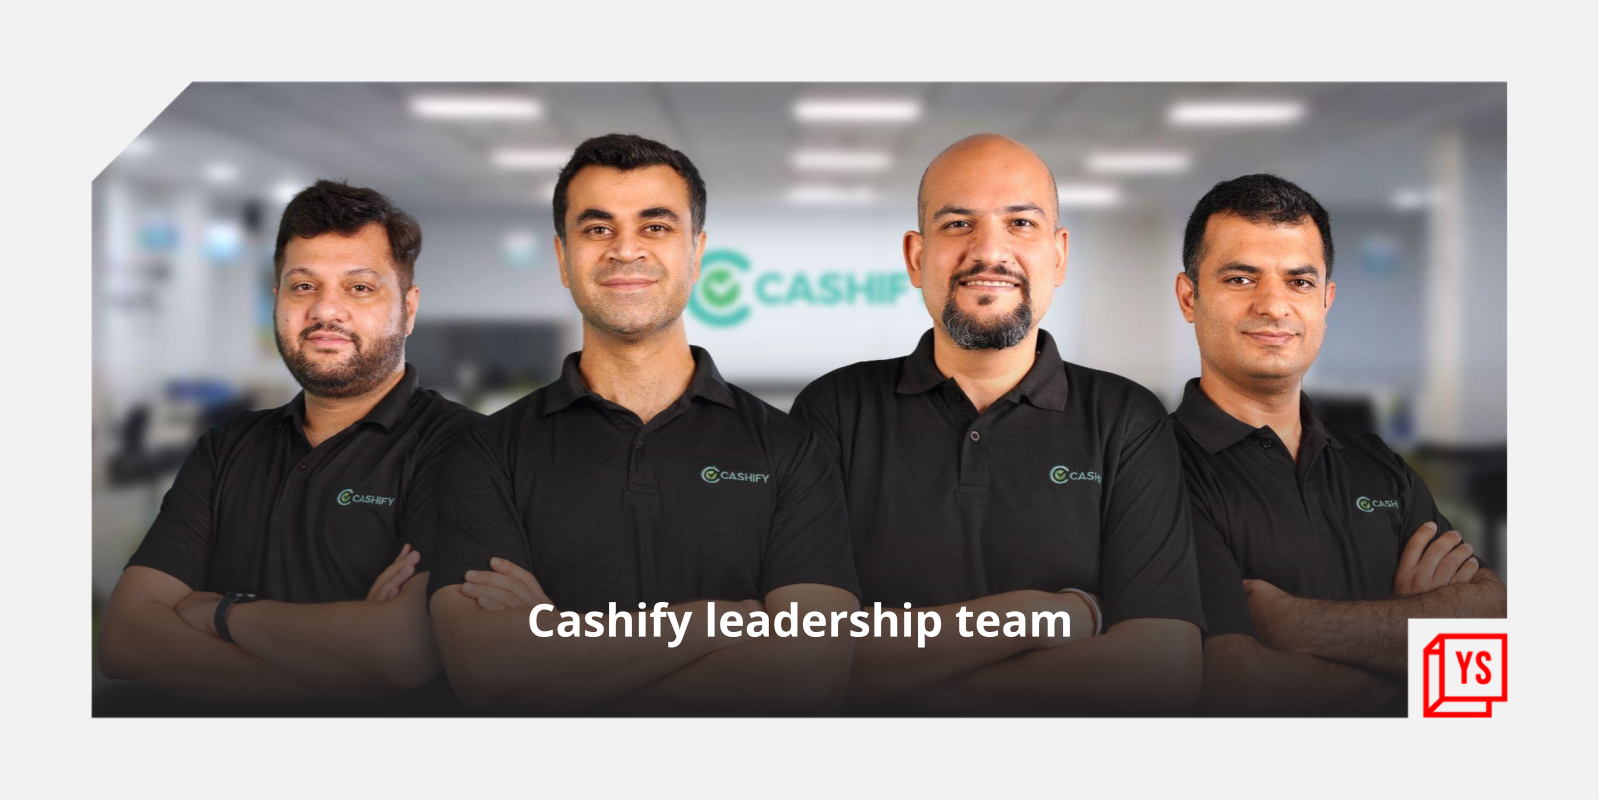 [Funding alert] Cashify raises $90M in Series E round led by NewQuest, Prosus